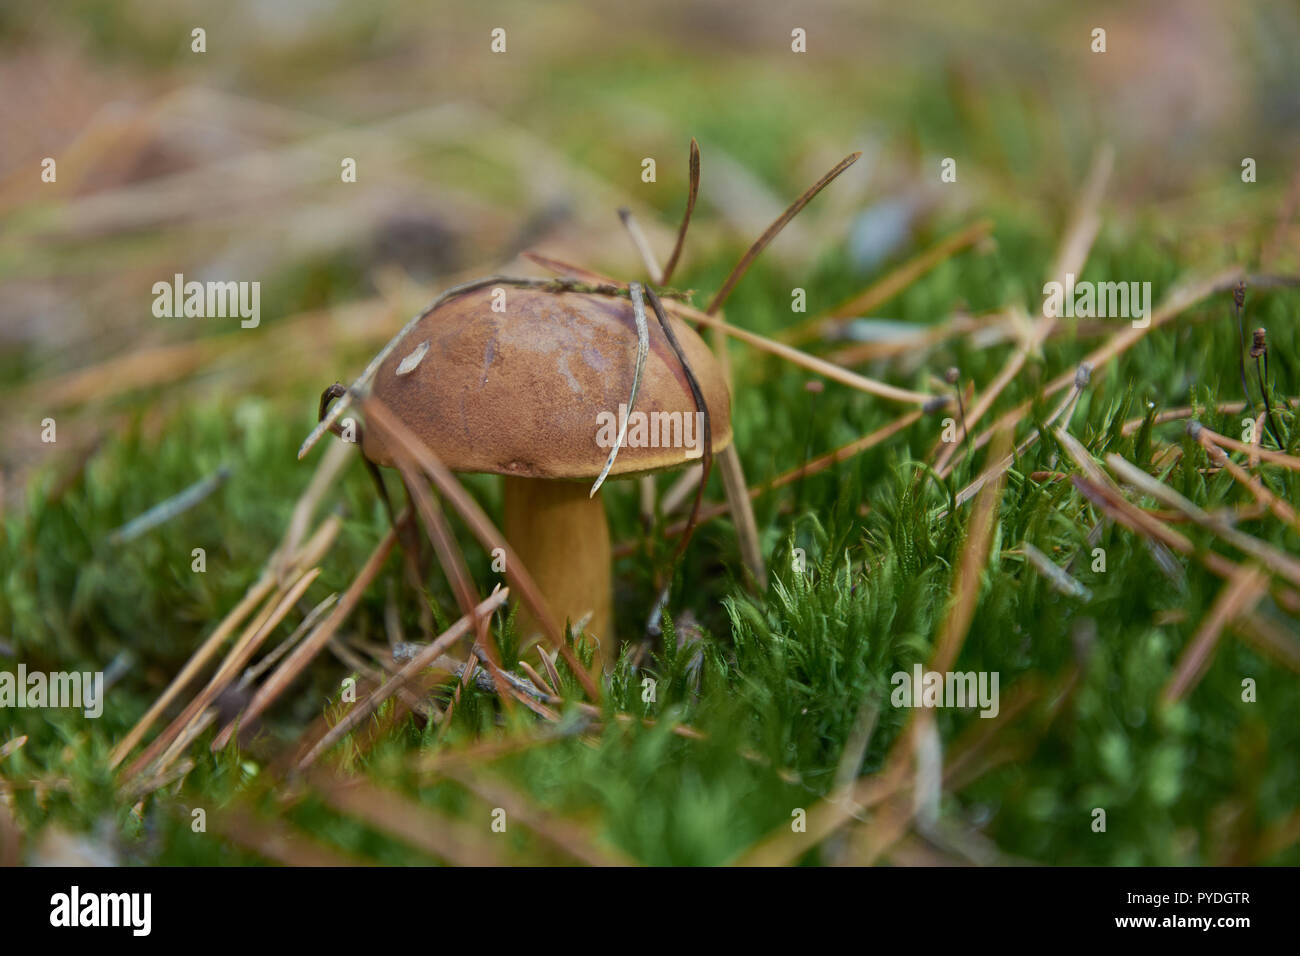 Mushroom (Imleria badia, commonly known as the bay bolete) with chestnut color cap in the forest Stock Photo